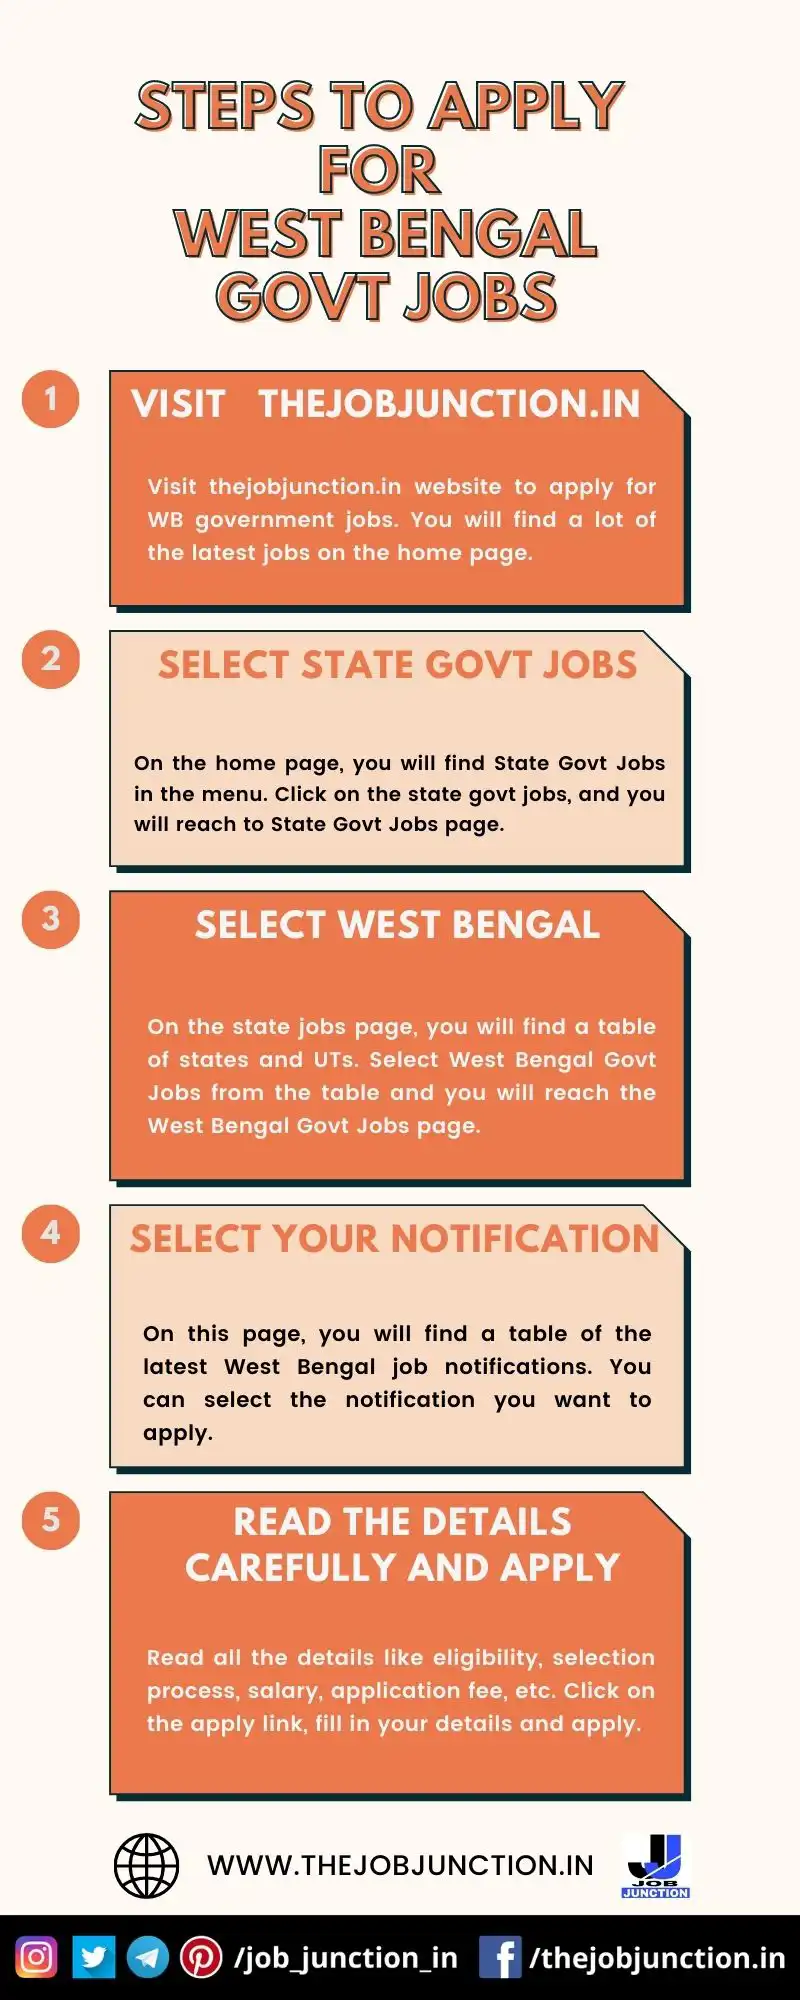 STEPS TO APPLY FOR WB GOVT JOBS